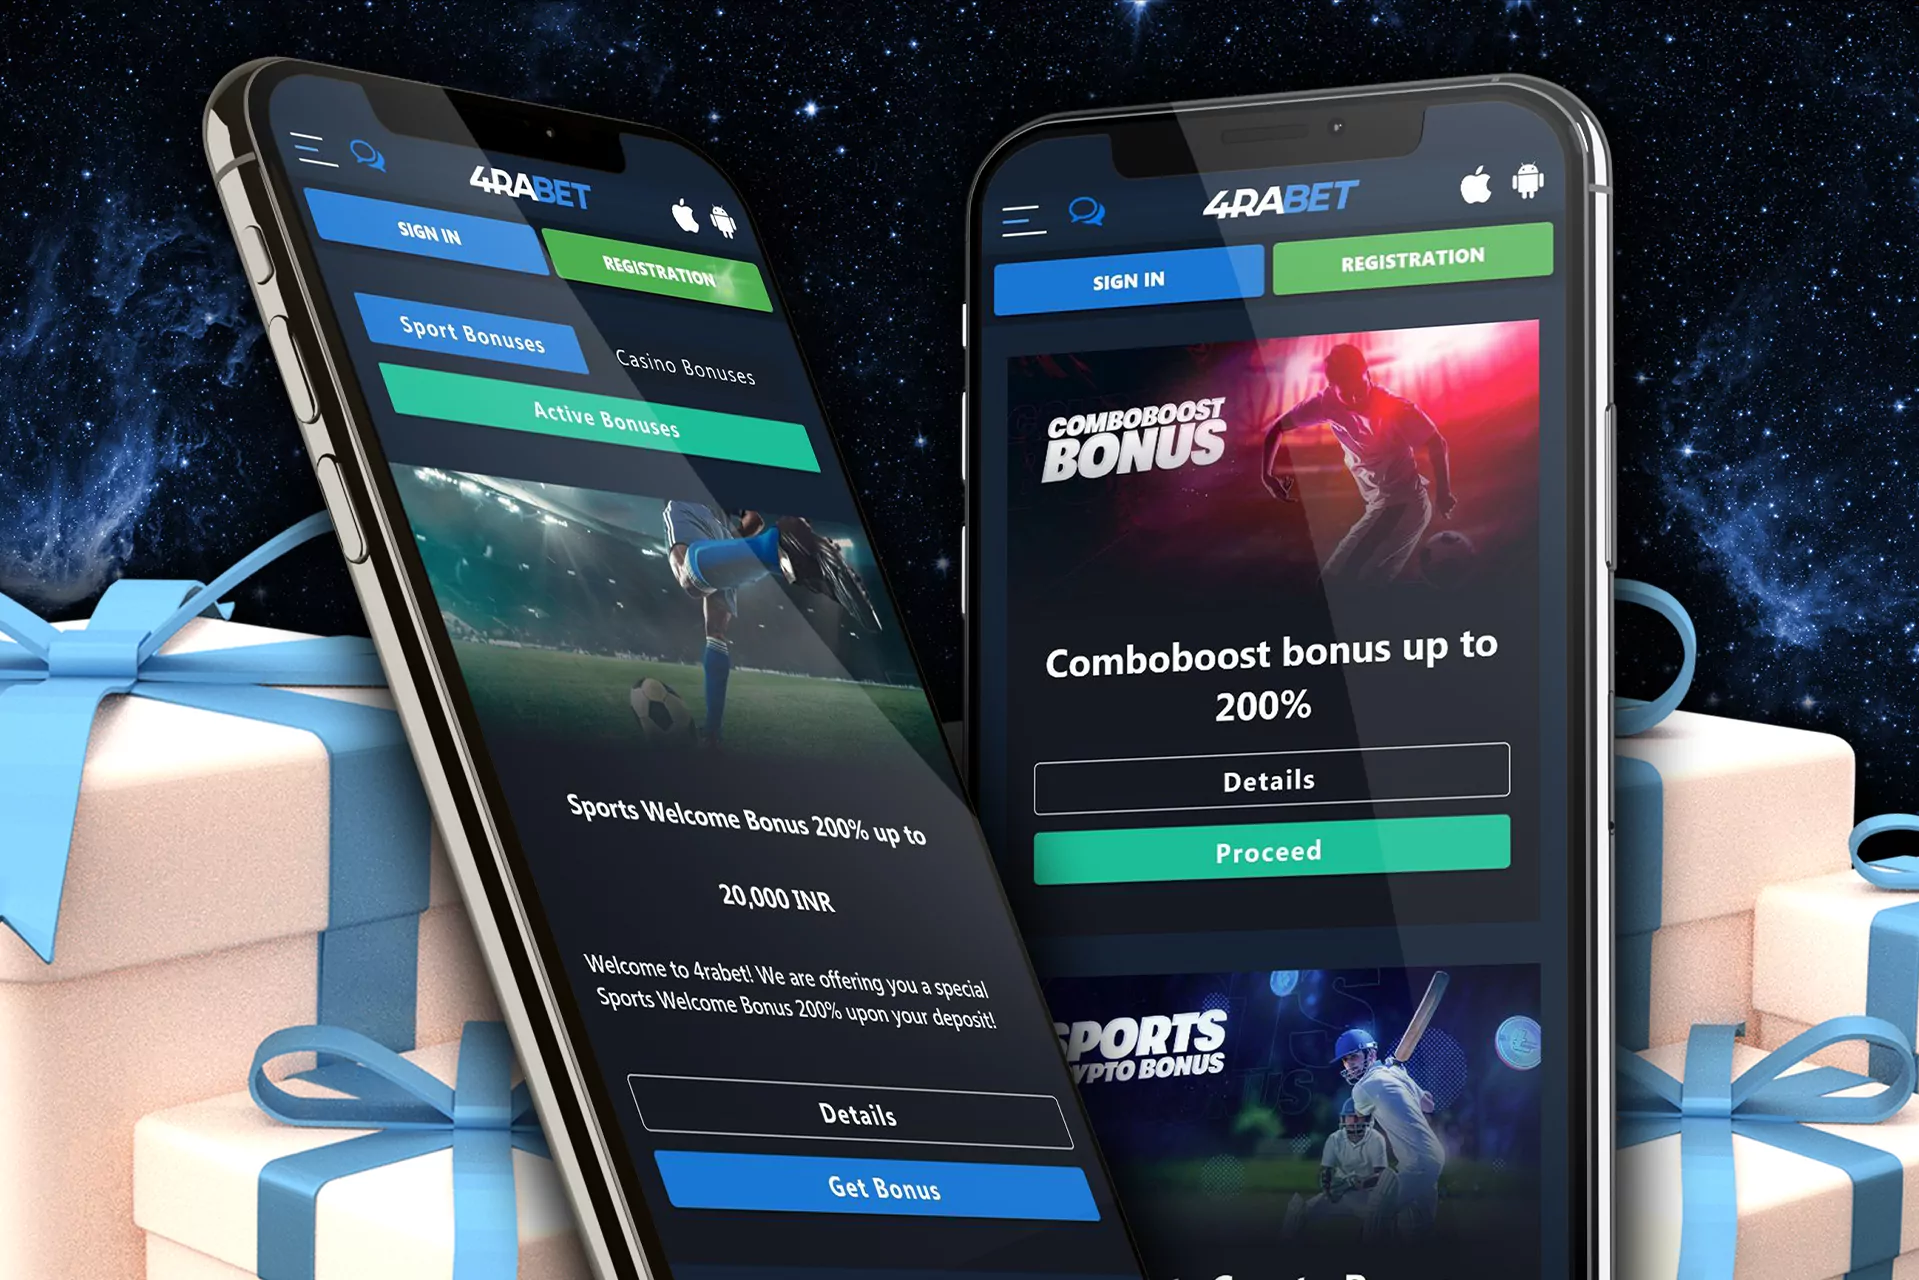 4rabet offers many dofferent bonuses and promo for its bettors.